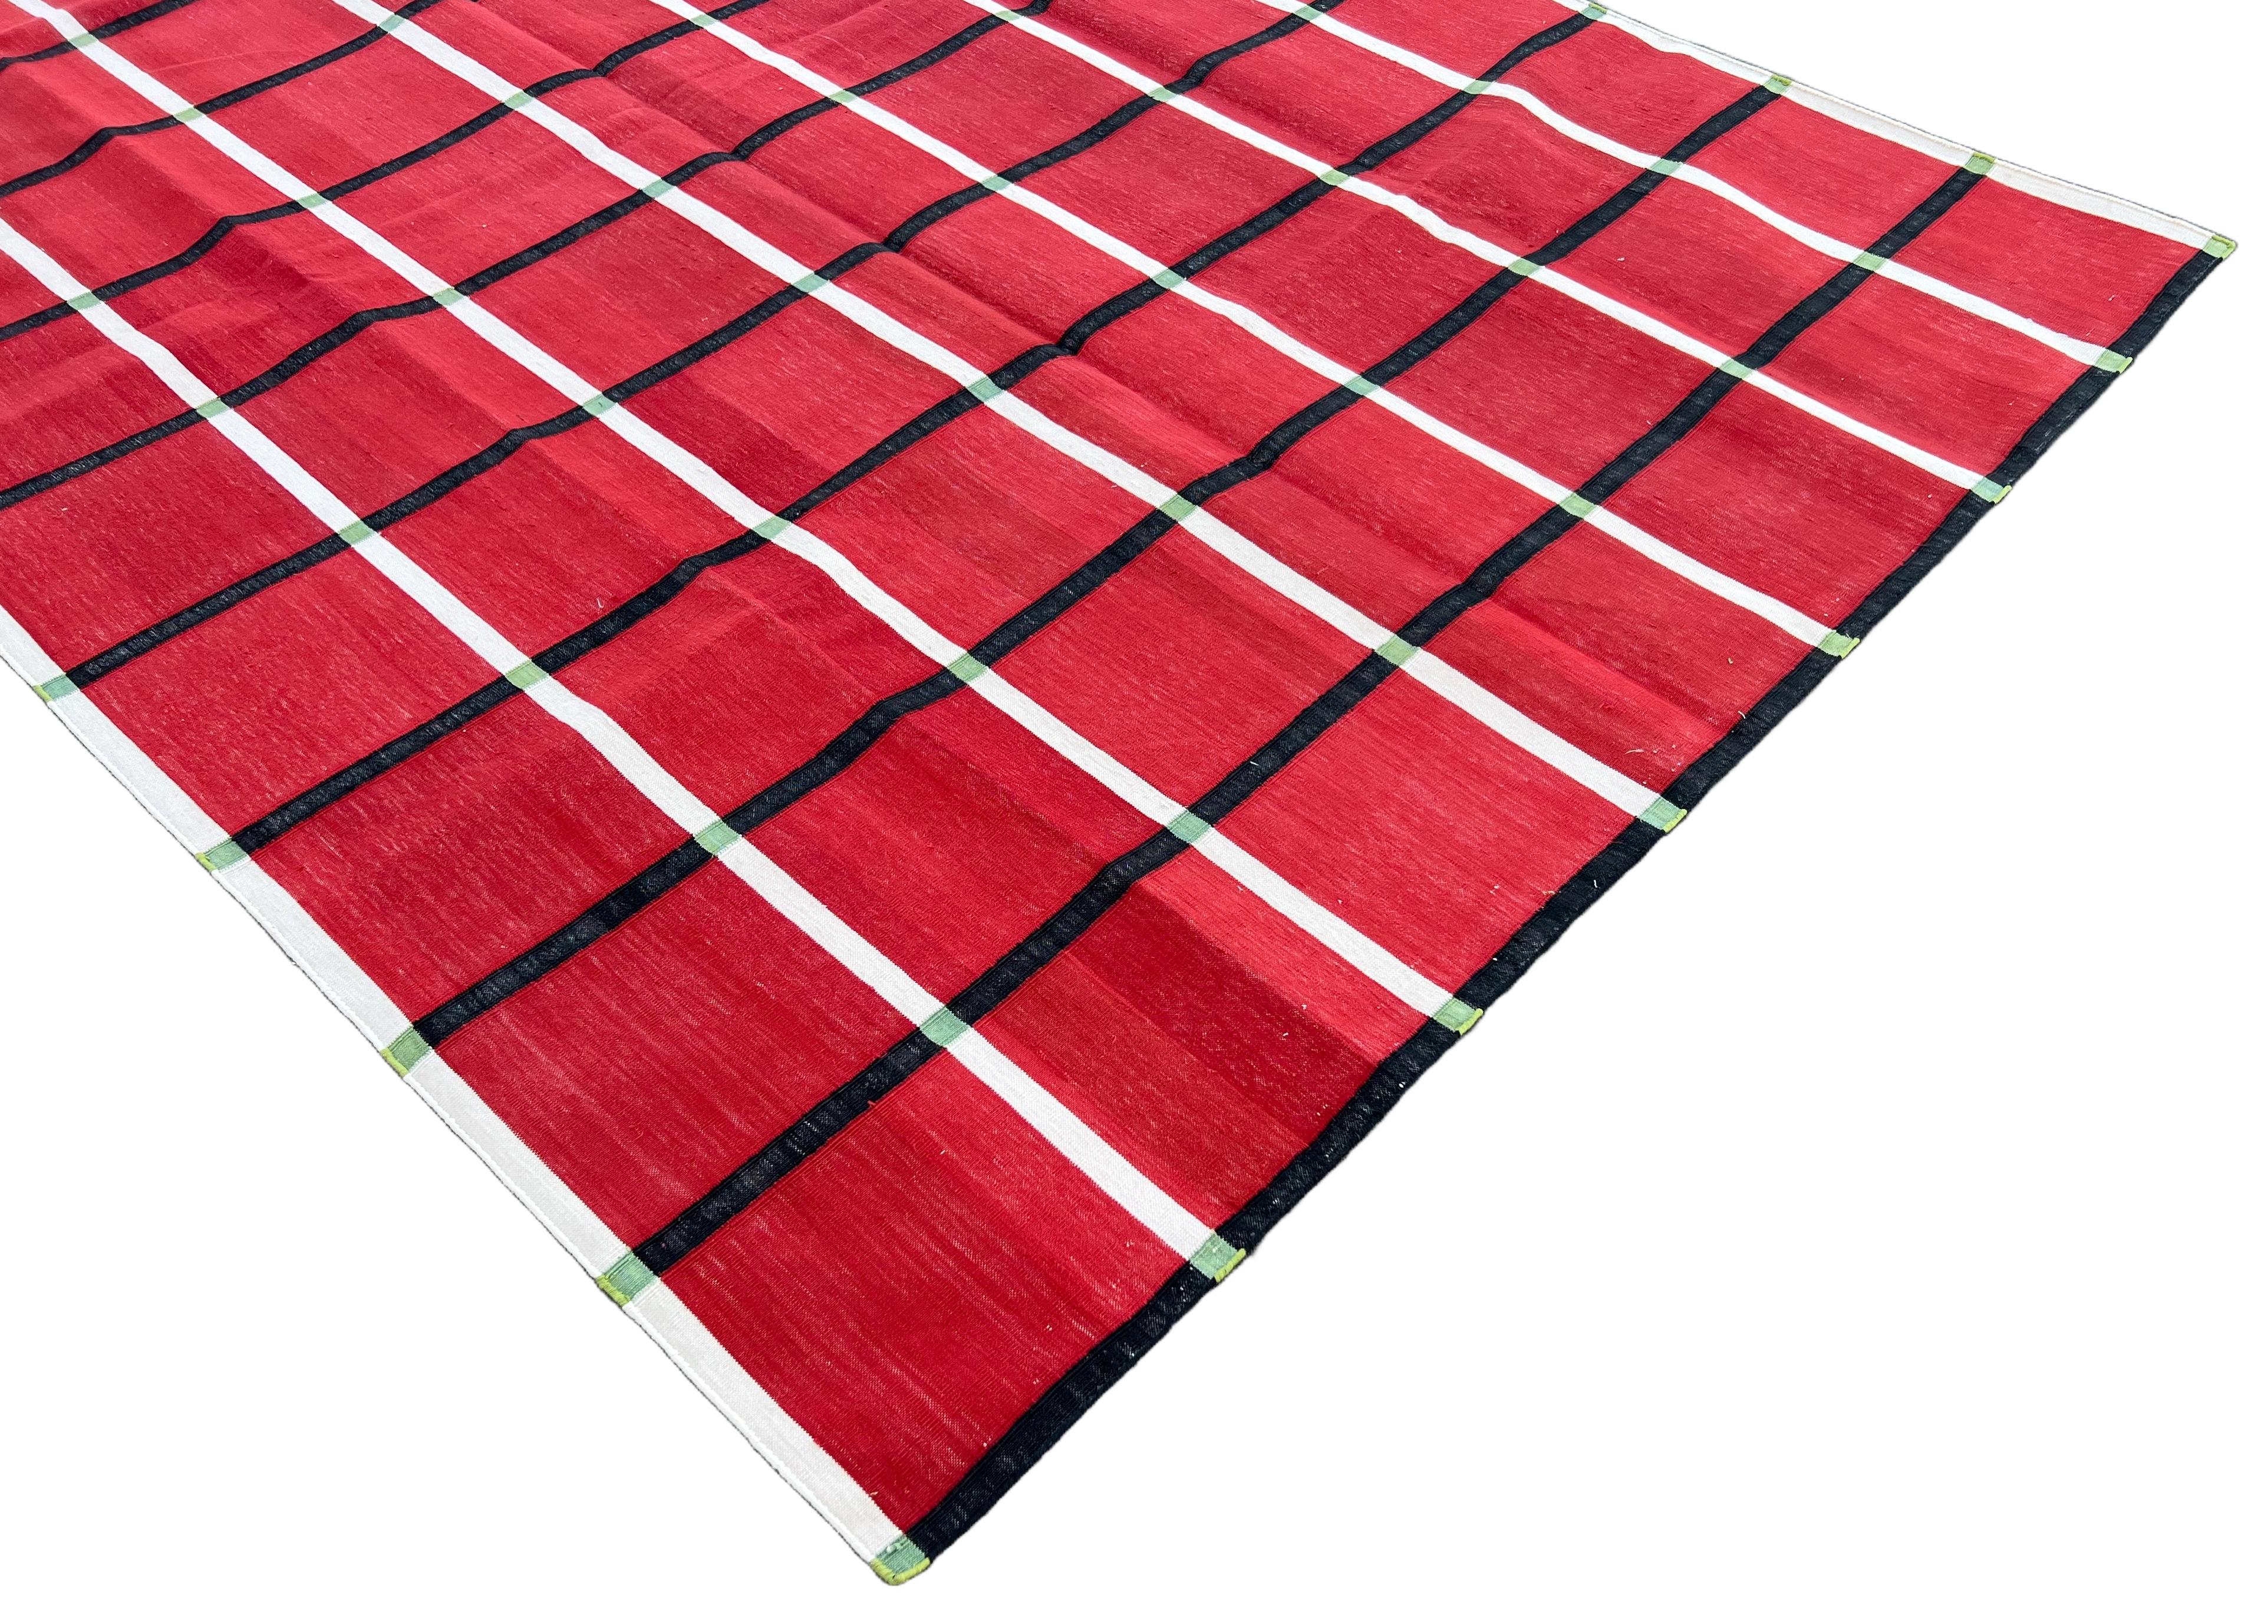 Hand-Woven Handmade Cotton Area Flat Weave Rug, Red & Black Windowpane Check Indian Dhurrie For Sale